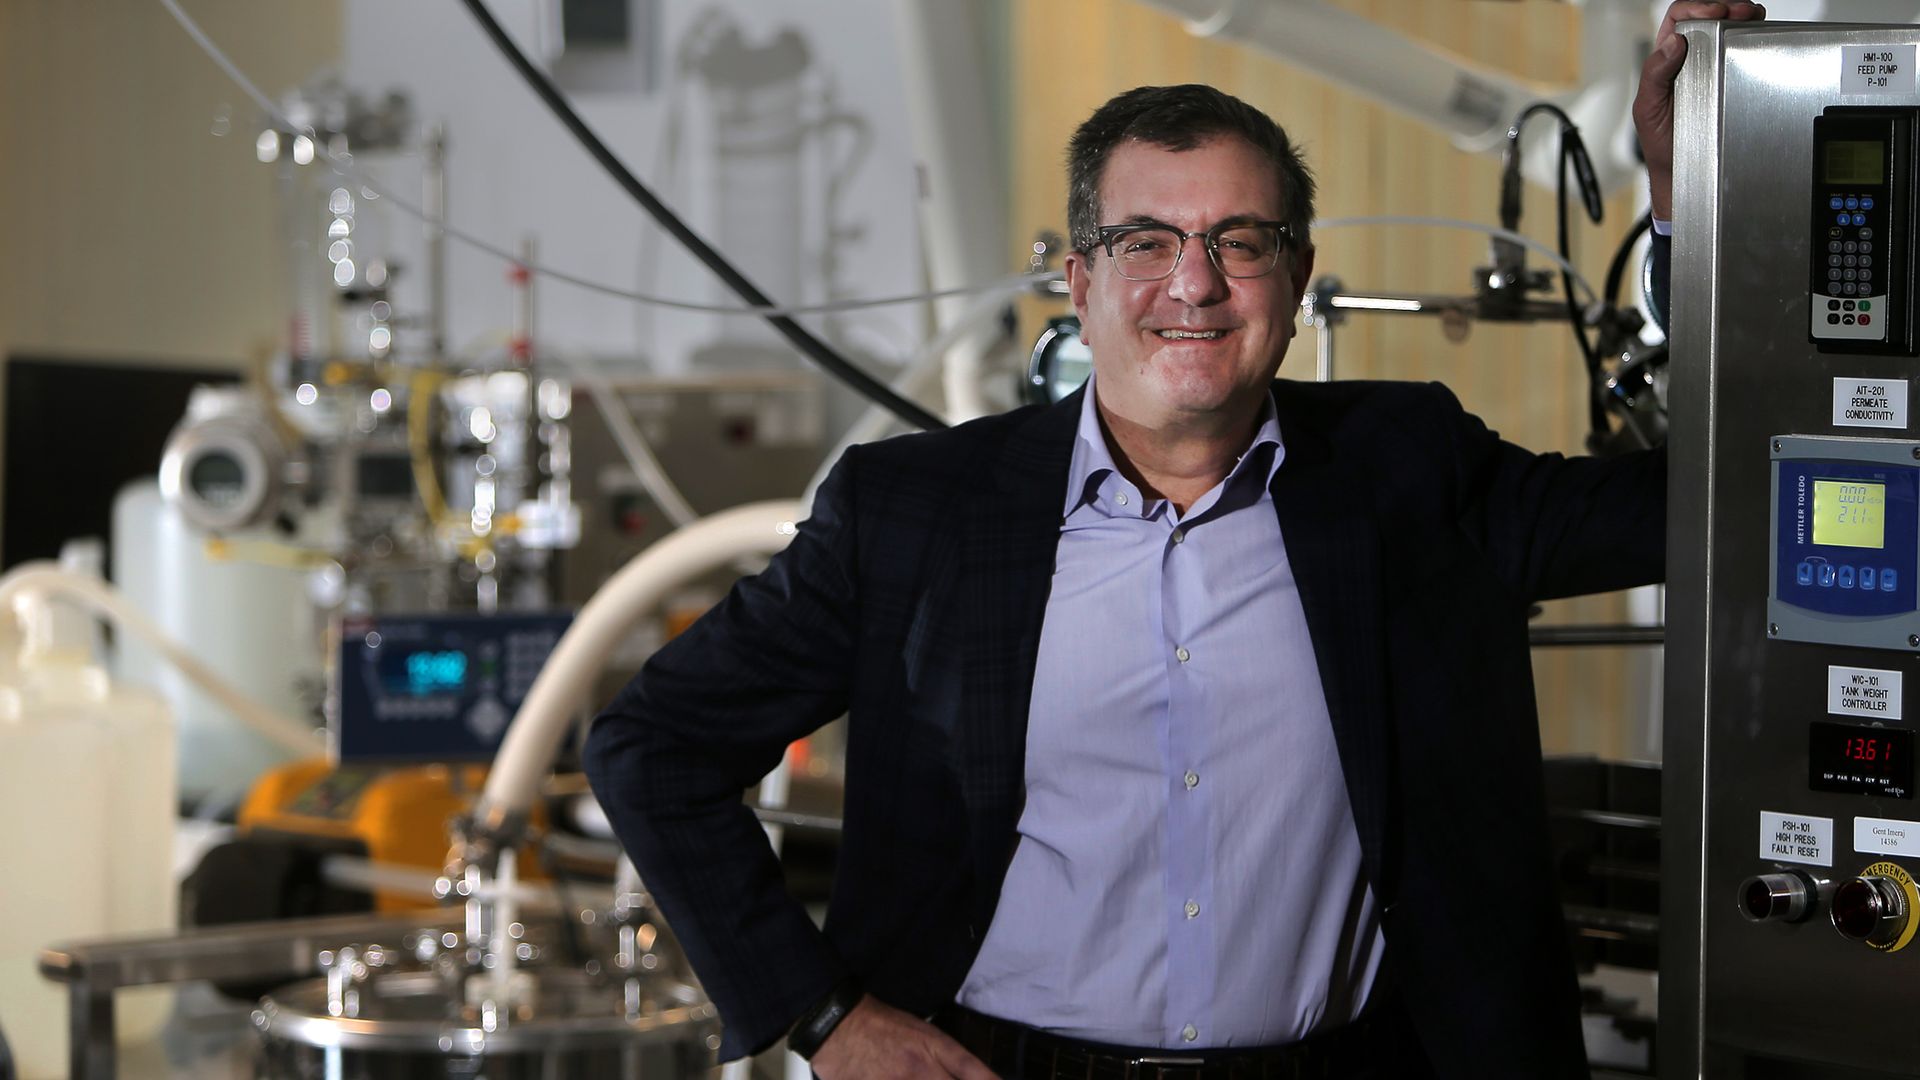 Alnylam CEO Dr. John Maraganore poses for a portrait with lab equipment behind.